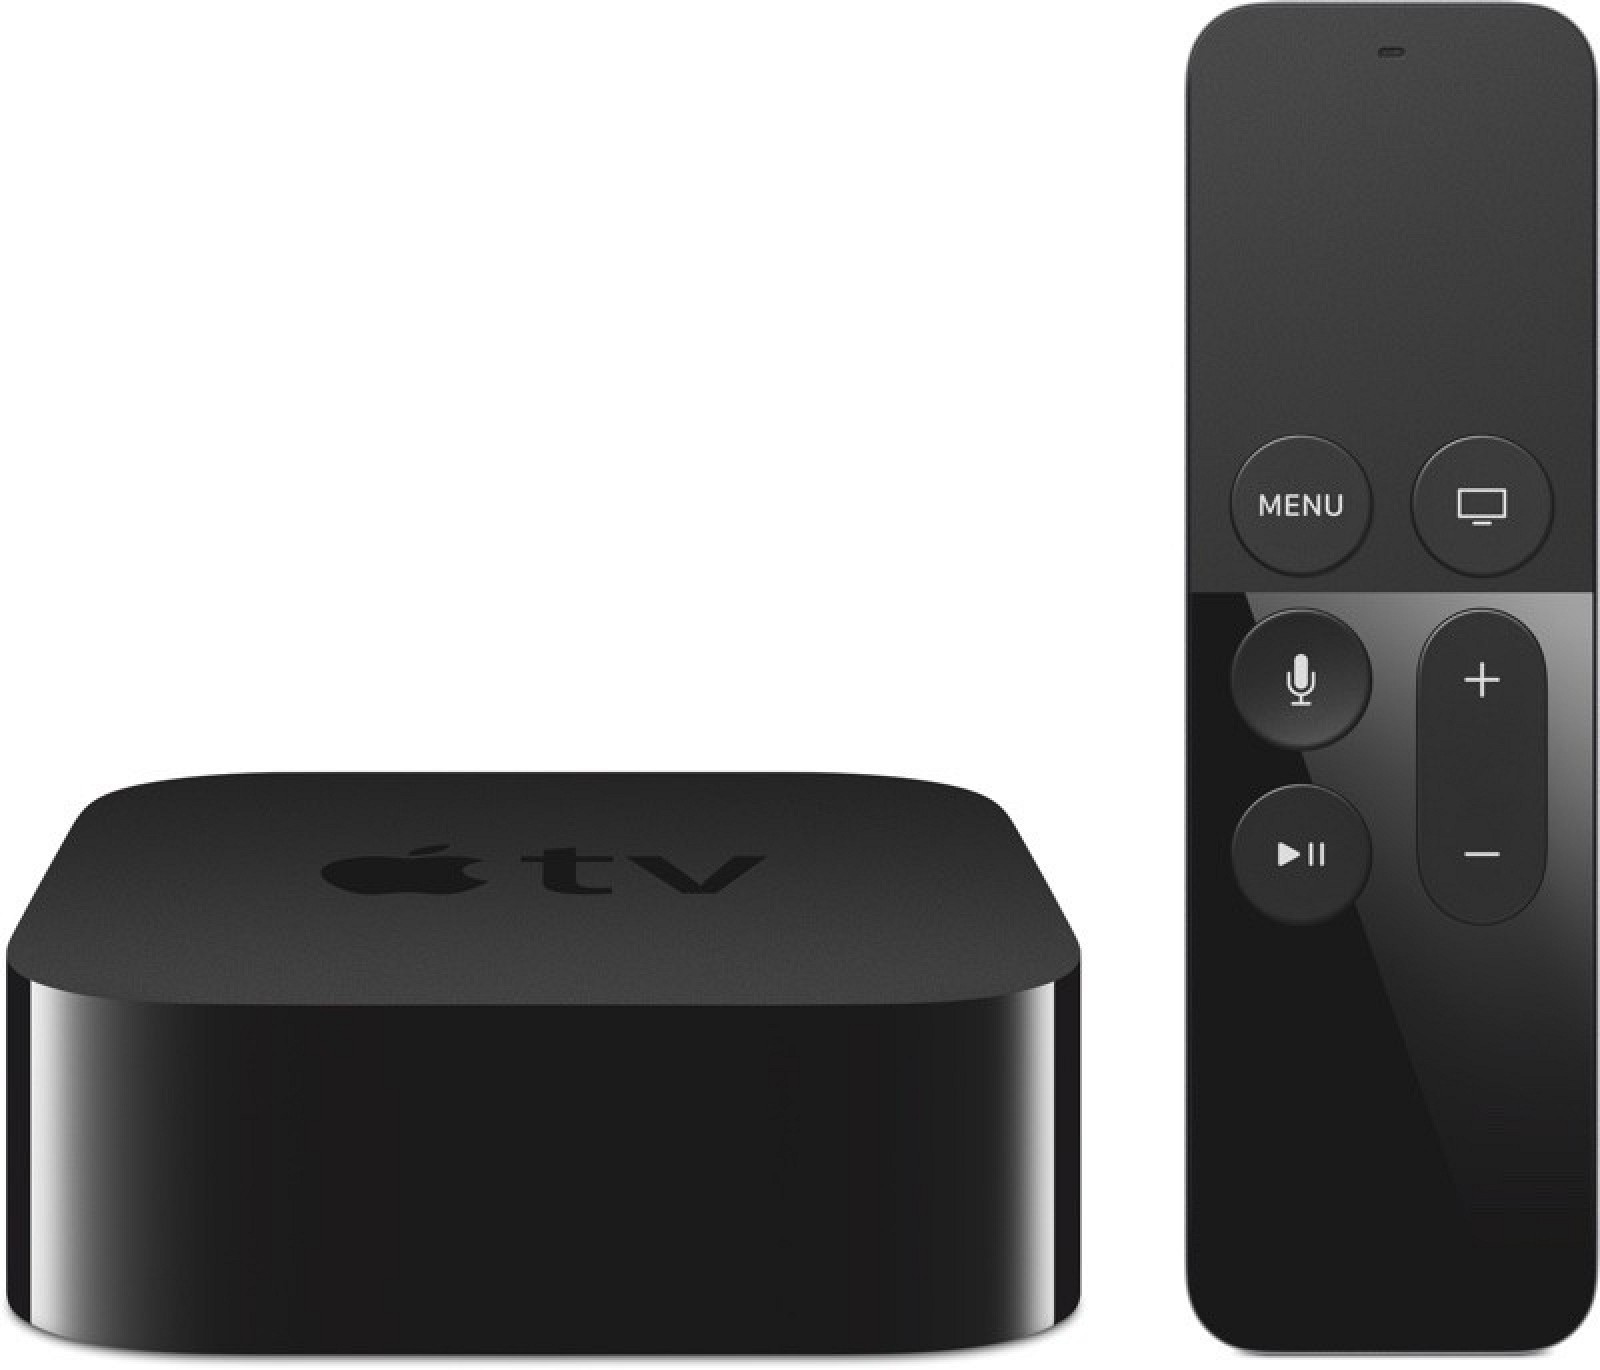 Introducing the New Apple TV